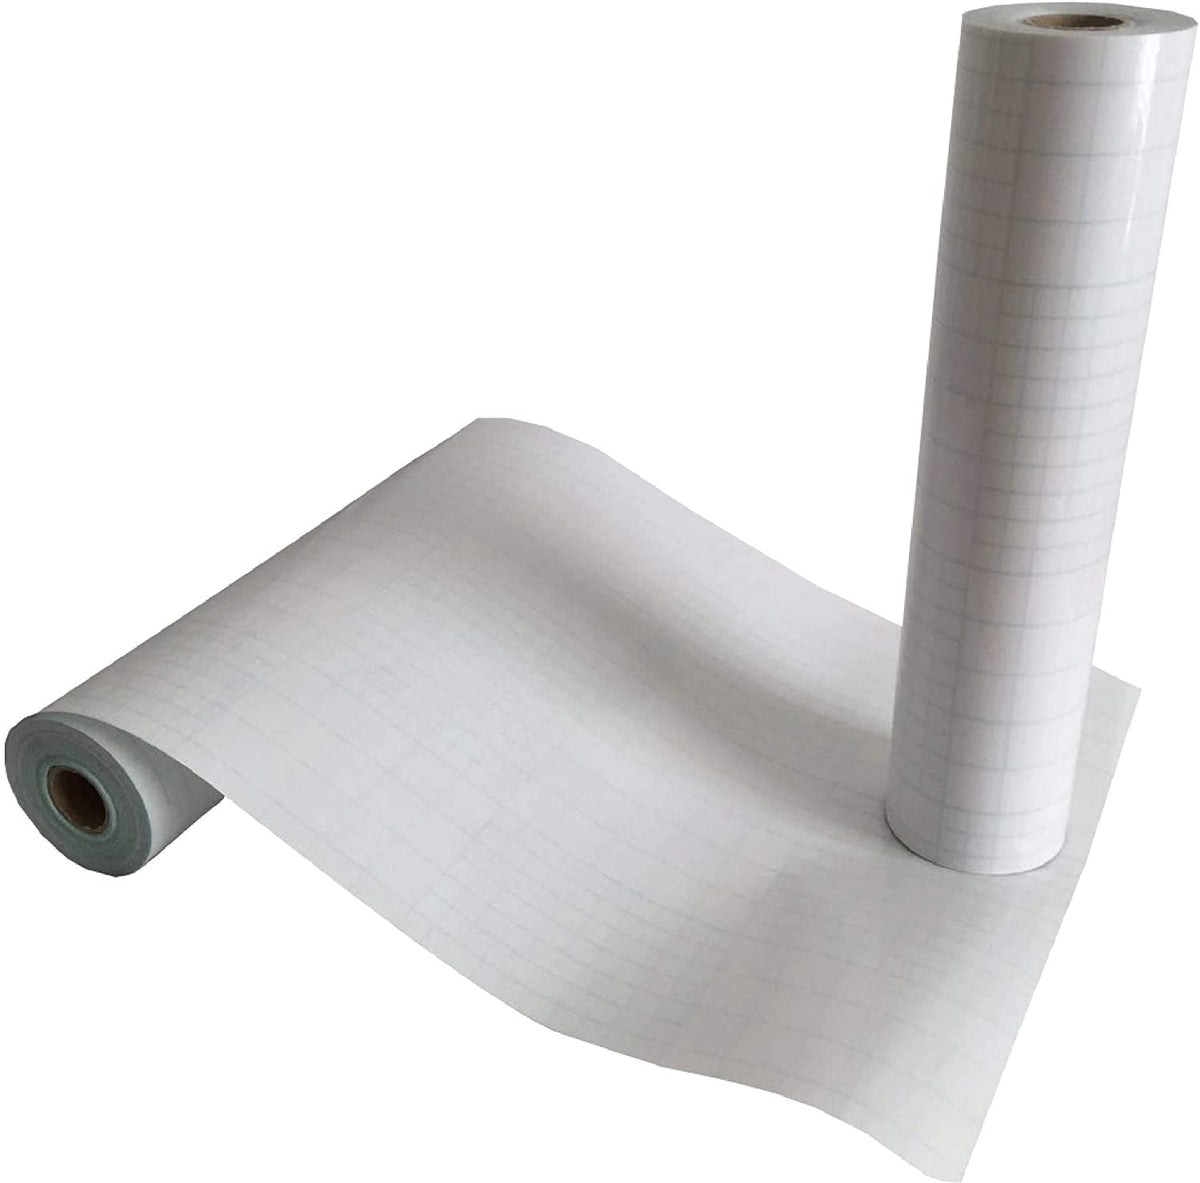 Transfer Tape for Vinyl, 48 inch x 100 Yards, Low Tack Clear Film Used as a  Premask/Application Tape for Large Vinyl Graphics